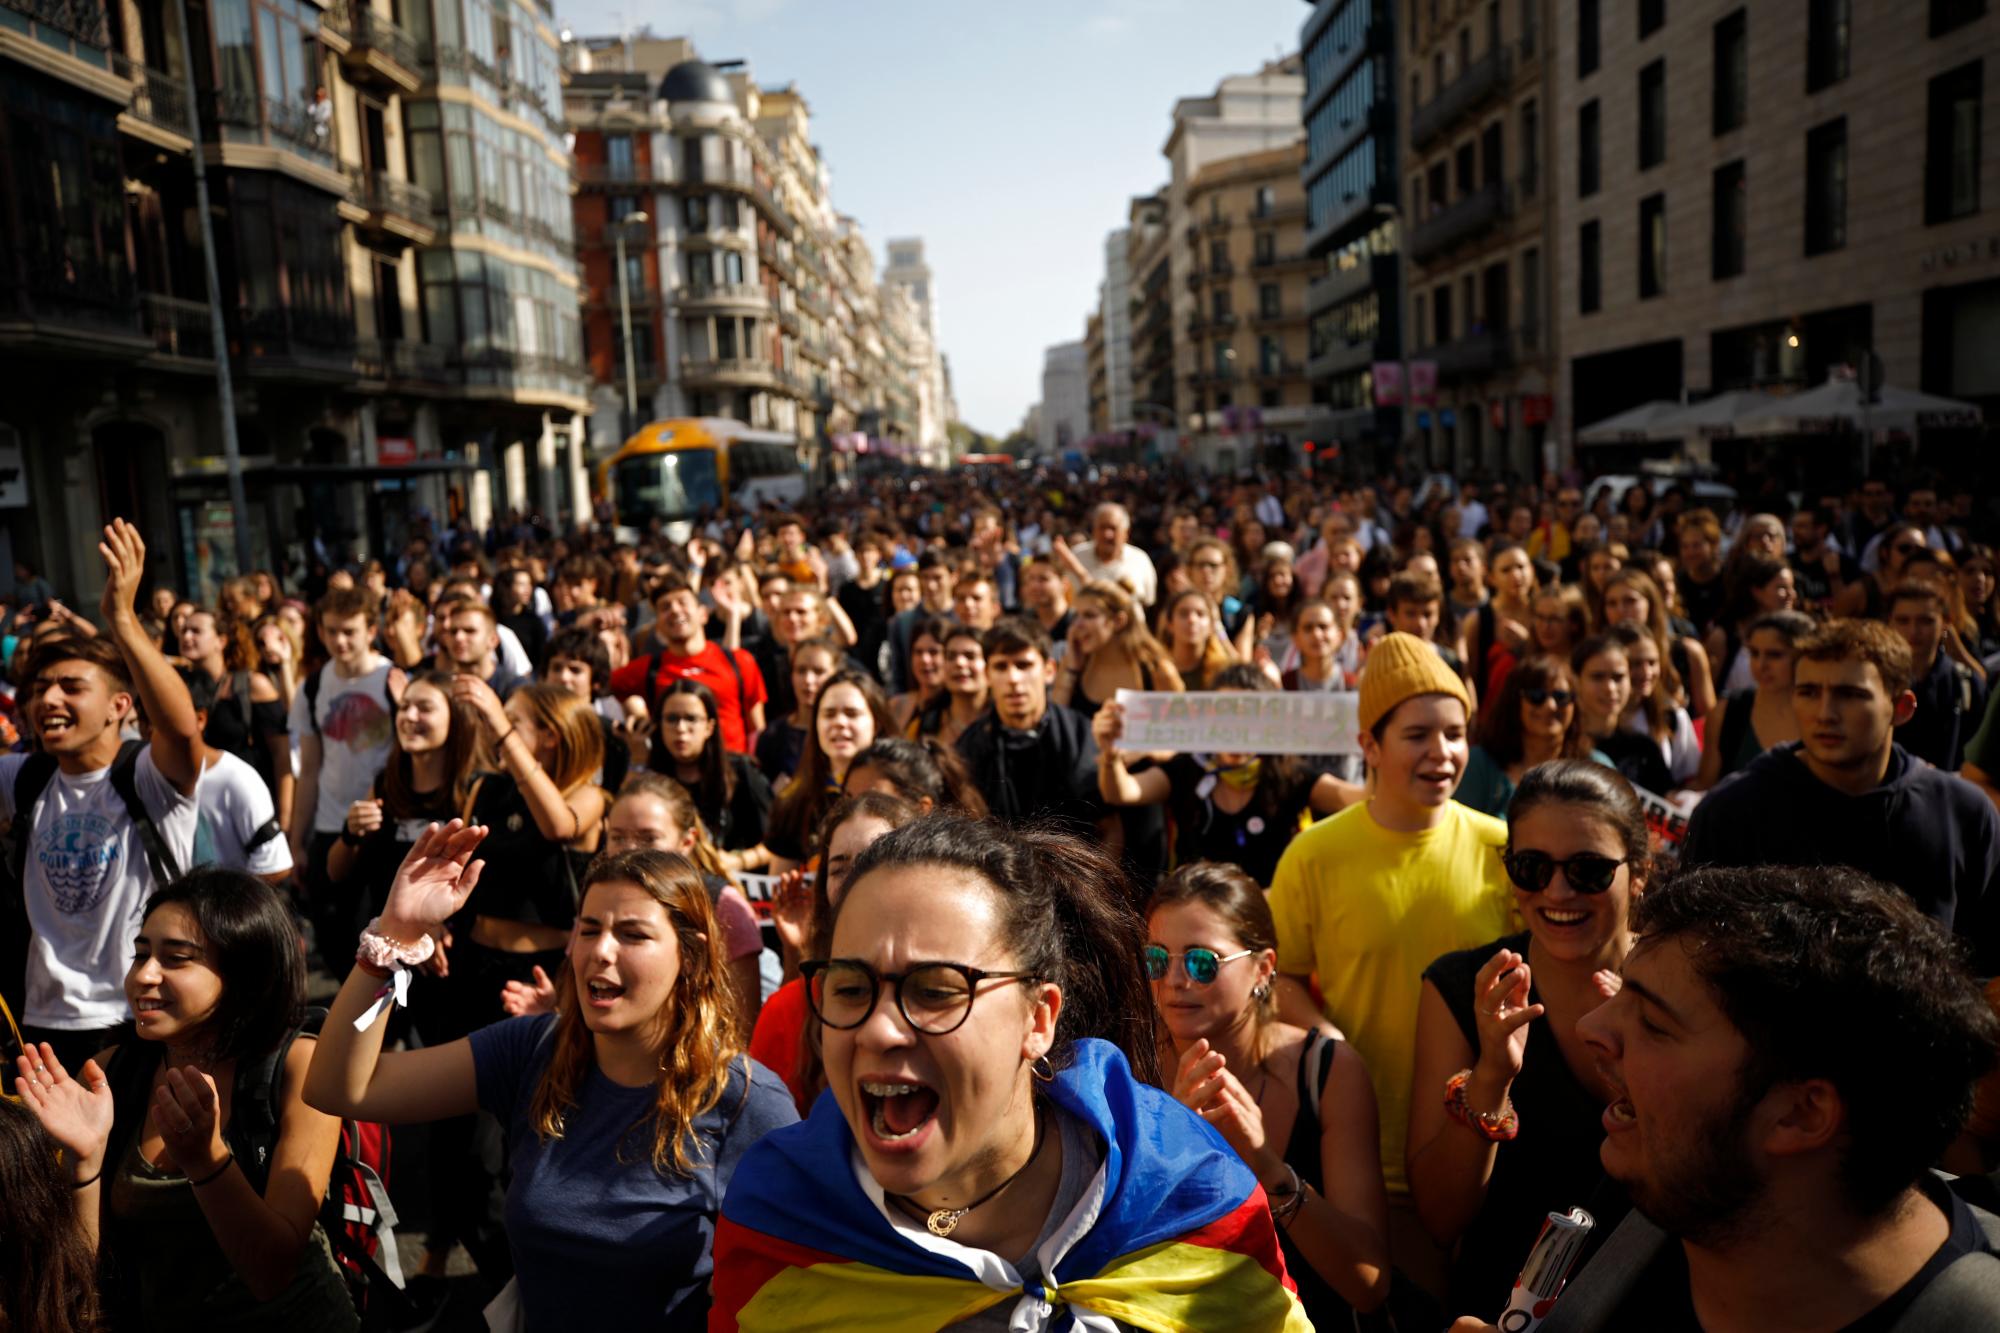 Protestors crowd a street in Barcelona, Spain, Monday, Oct. 14, 2019. Spains Supreme Court on Monday convicted 12 former Catalan politicians and activists for their roles in a secession bid in 2017, a ruling that immediately inflamed independence supporters in the wealthy northeastern region. (AP Photo/Emilio Morenatti)